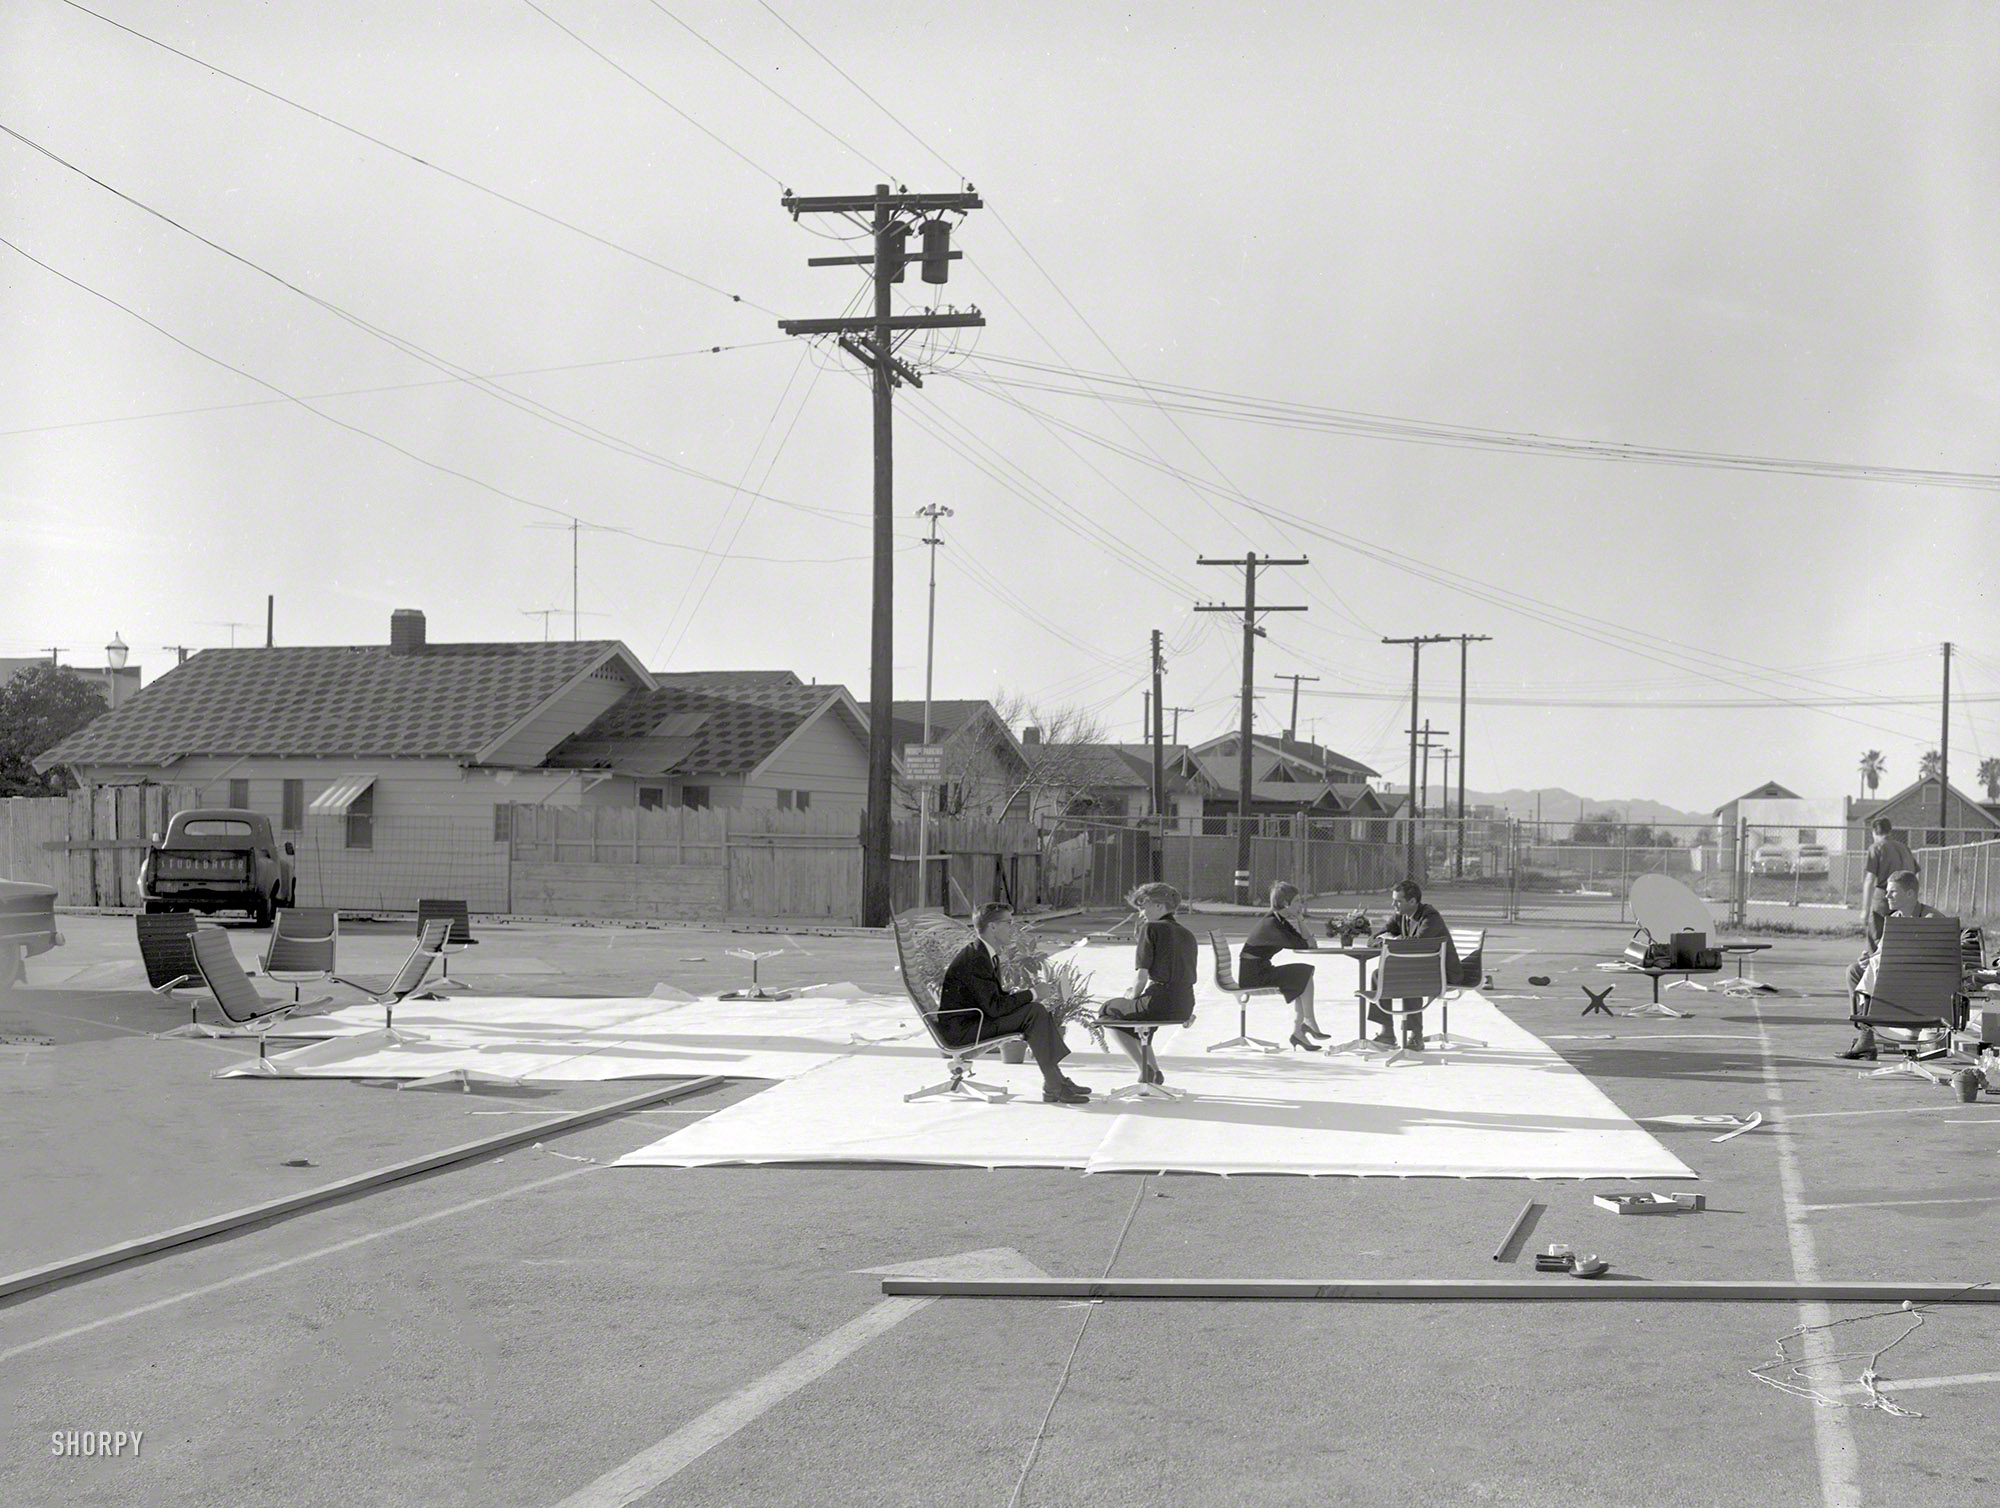 Somewhere around Los Angeles circa 1958. "Aluminum Group furniture (chairs, ottomans, tables) designed by Charles Eames for Herman Miller Inc." Our third behind-the-scenes look at the glamorous world of furniture modeling. Large format negative from the Office of Charles and Ray Eames. View full size.